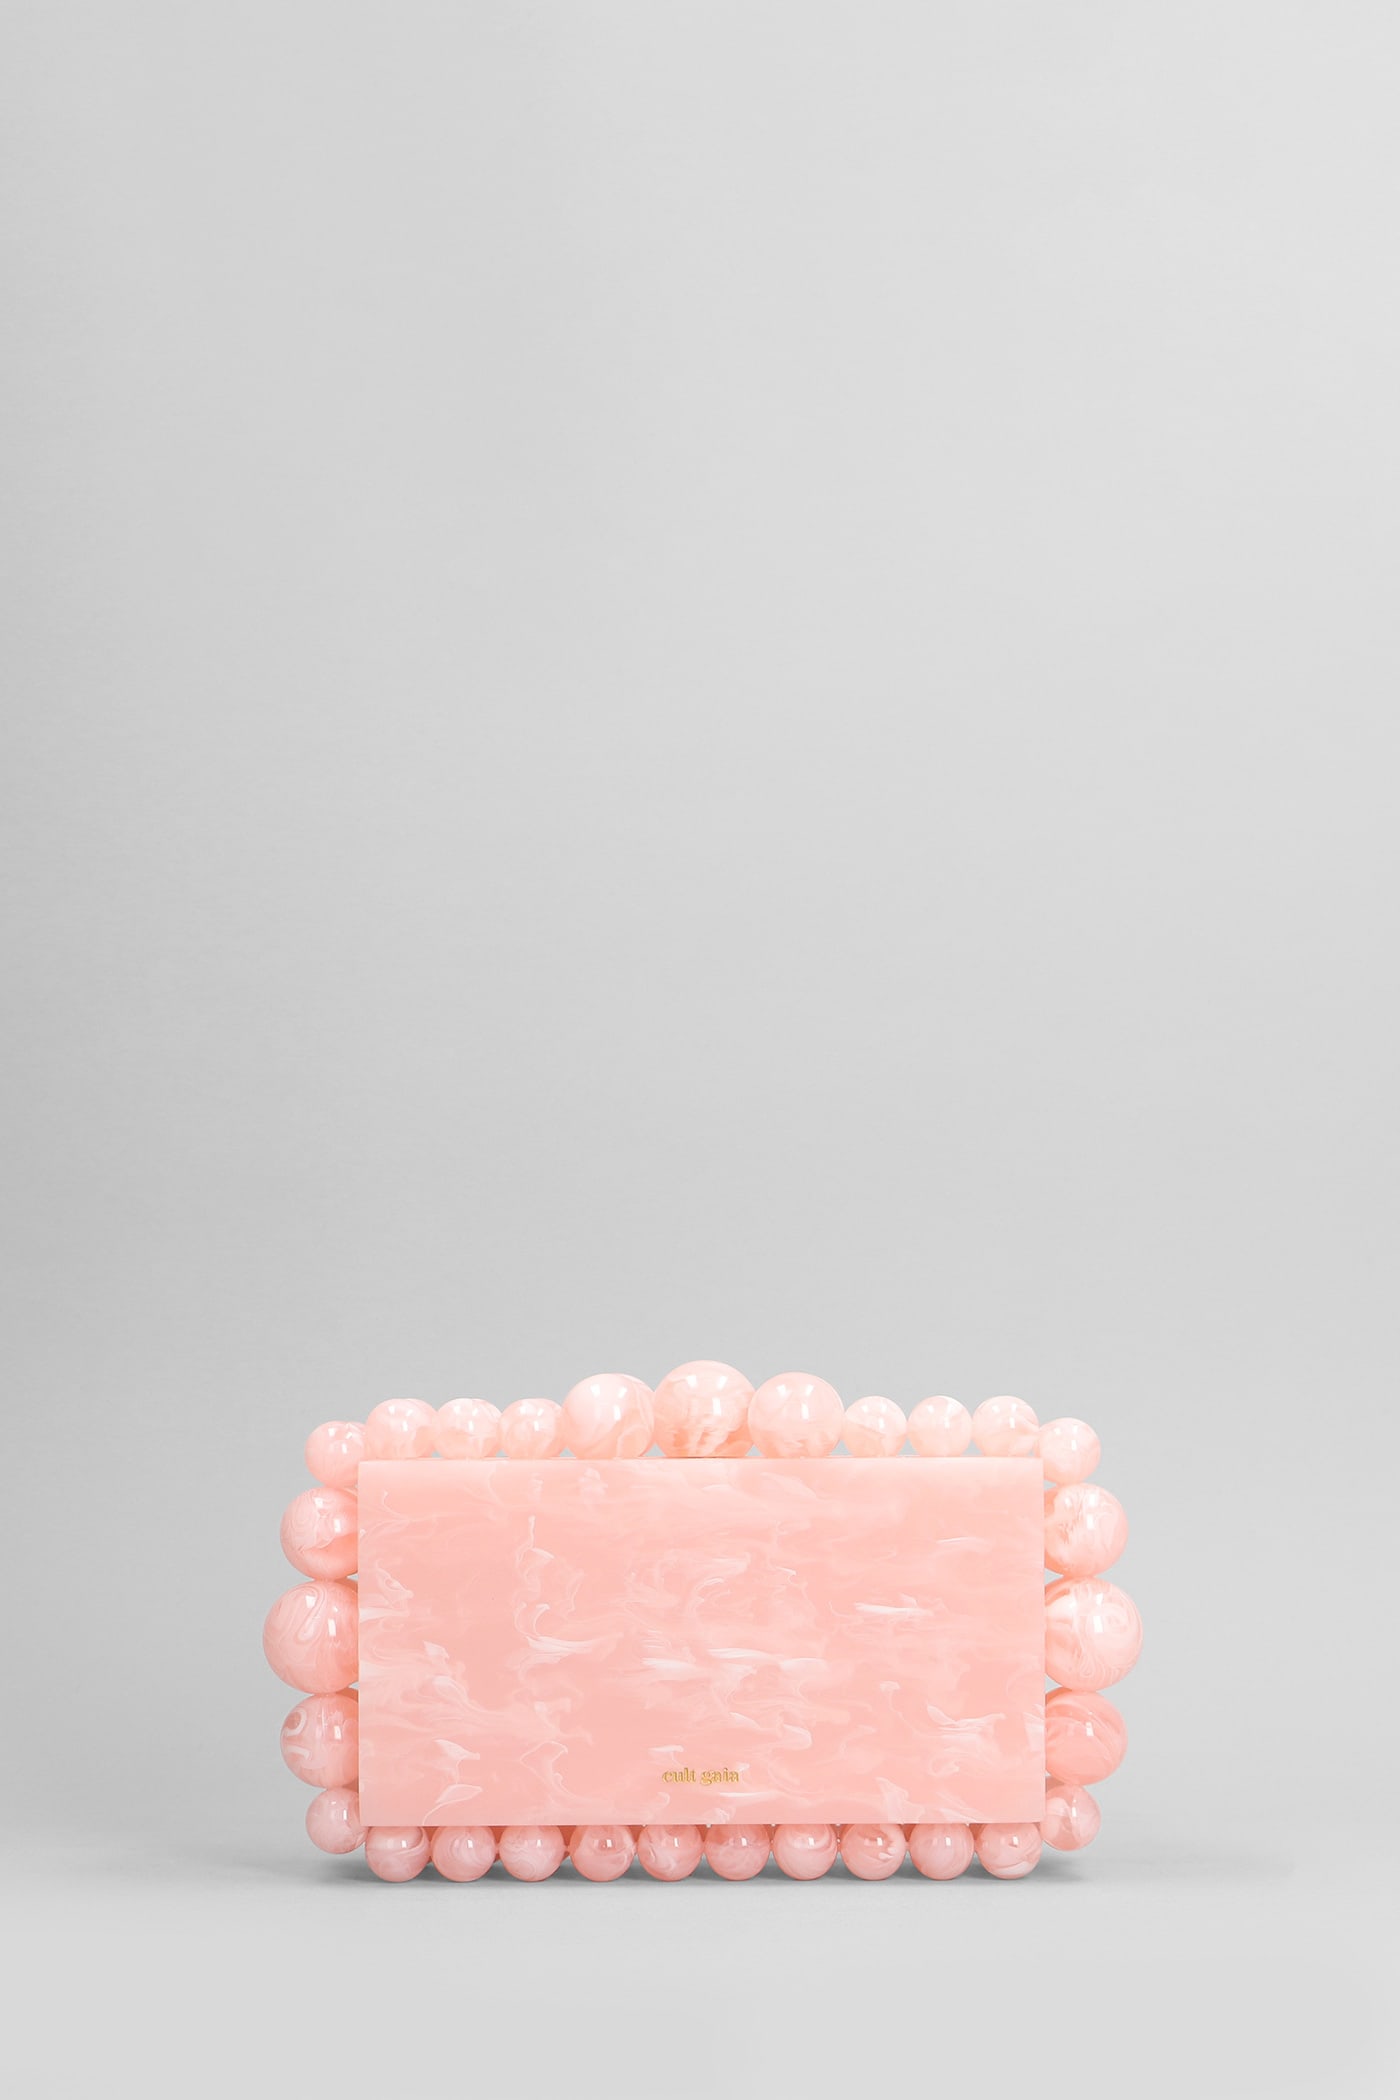 Cult Gaia Eos Hand Bag In Rose-pink Acrylic